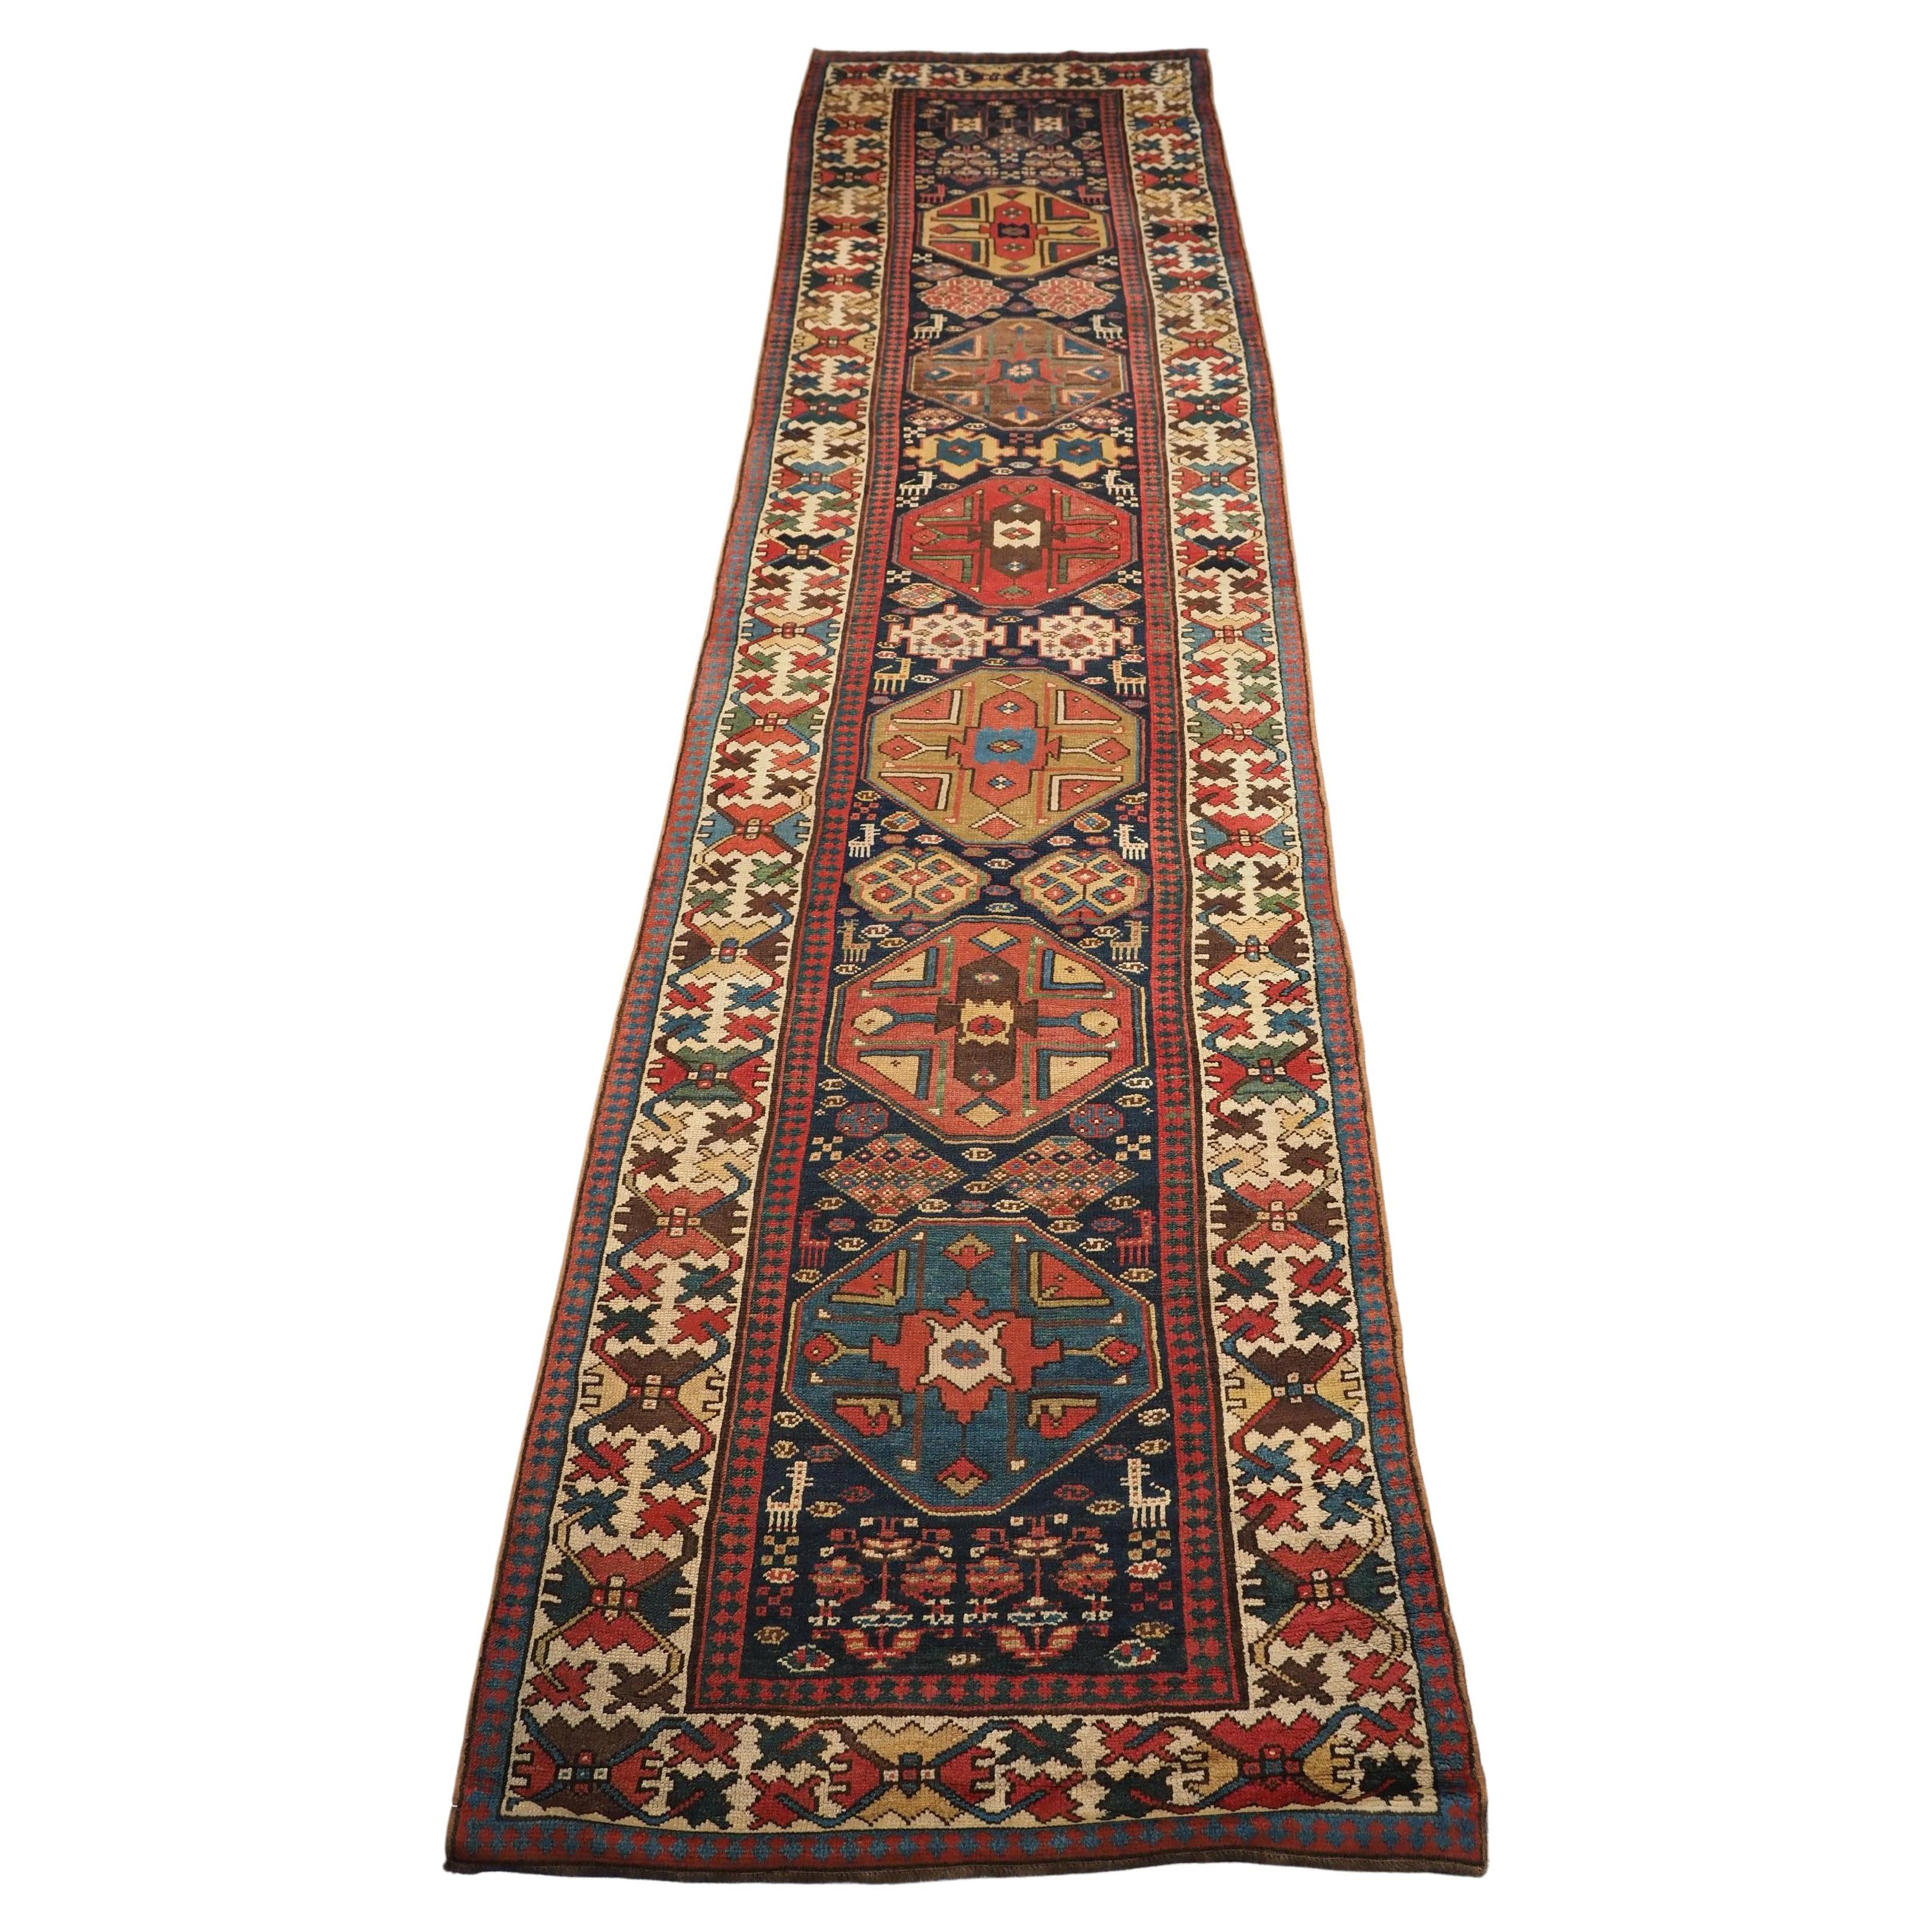 Antique south Caucasian or Kurdish runner of superb design and colour. For Sale